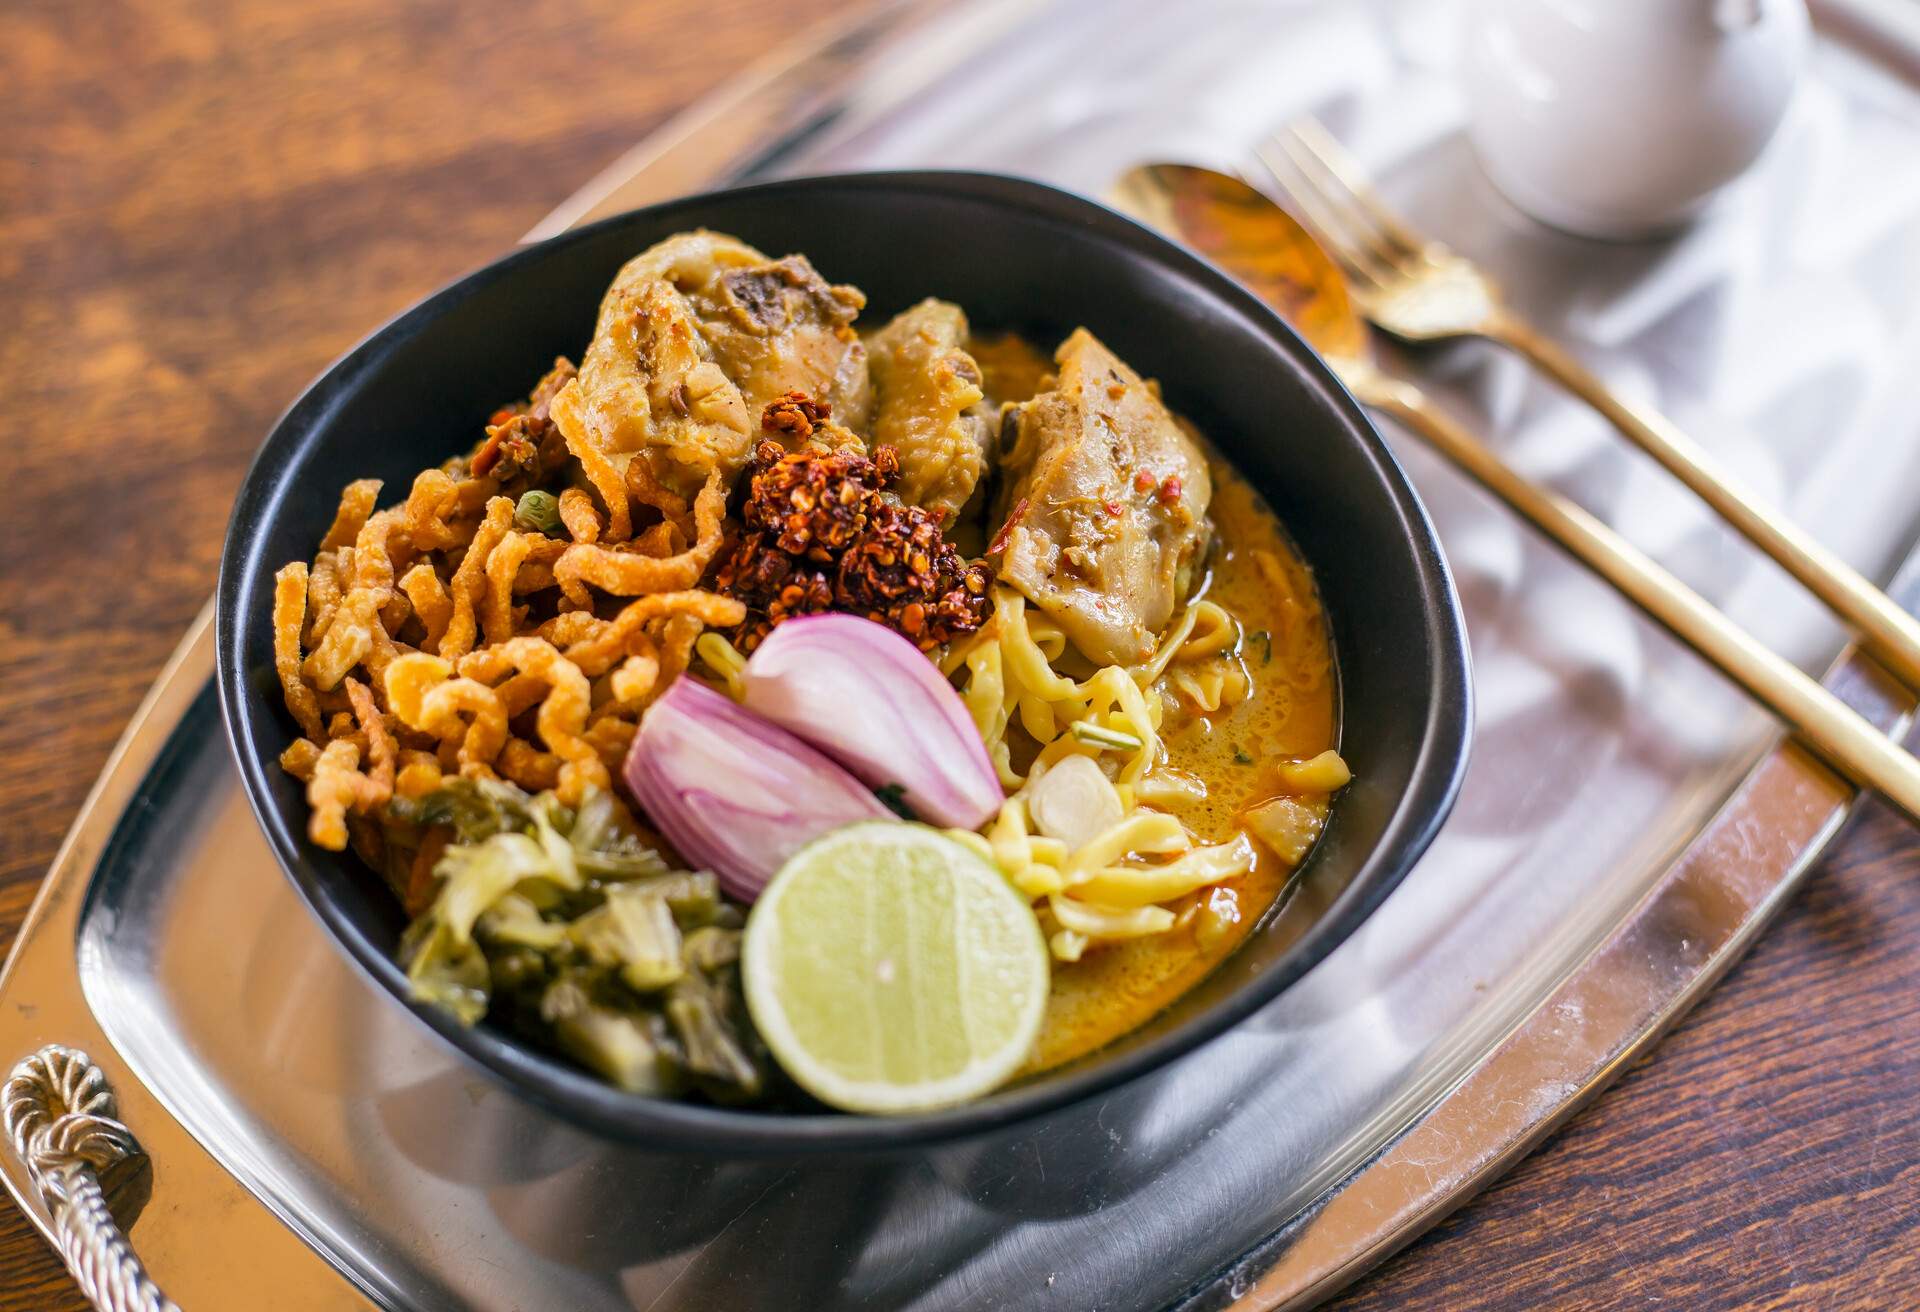 Khao soi - Traditional Thai Food, Thai curry with  A noodle dish in a yellow curry with chicken. .Khao soy a famous northern Thai food